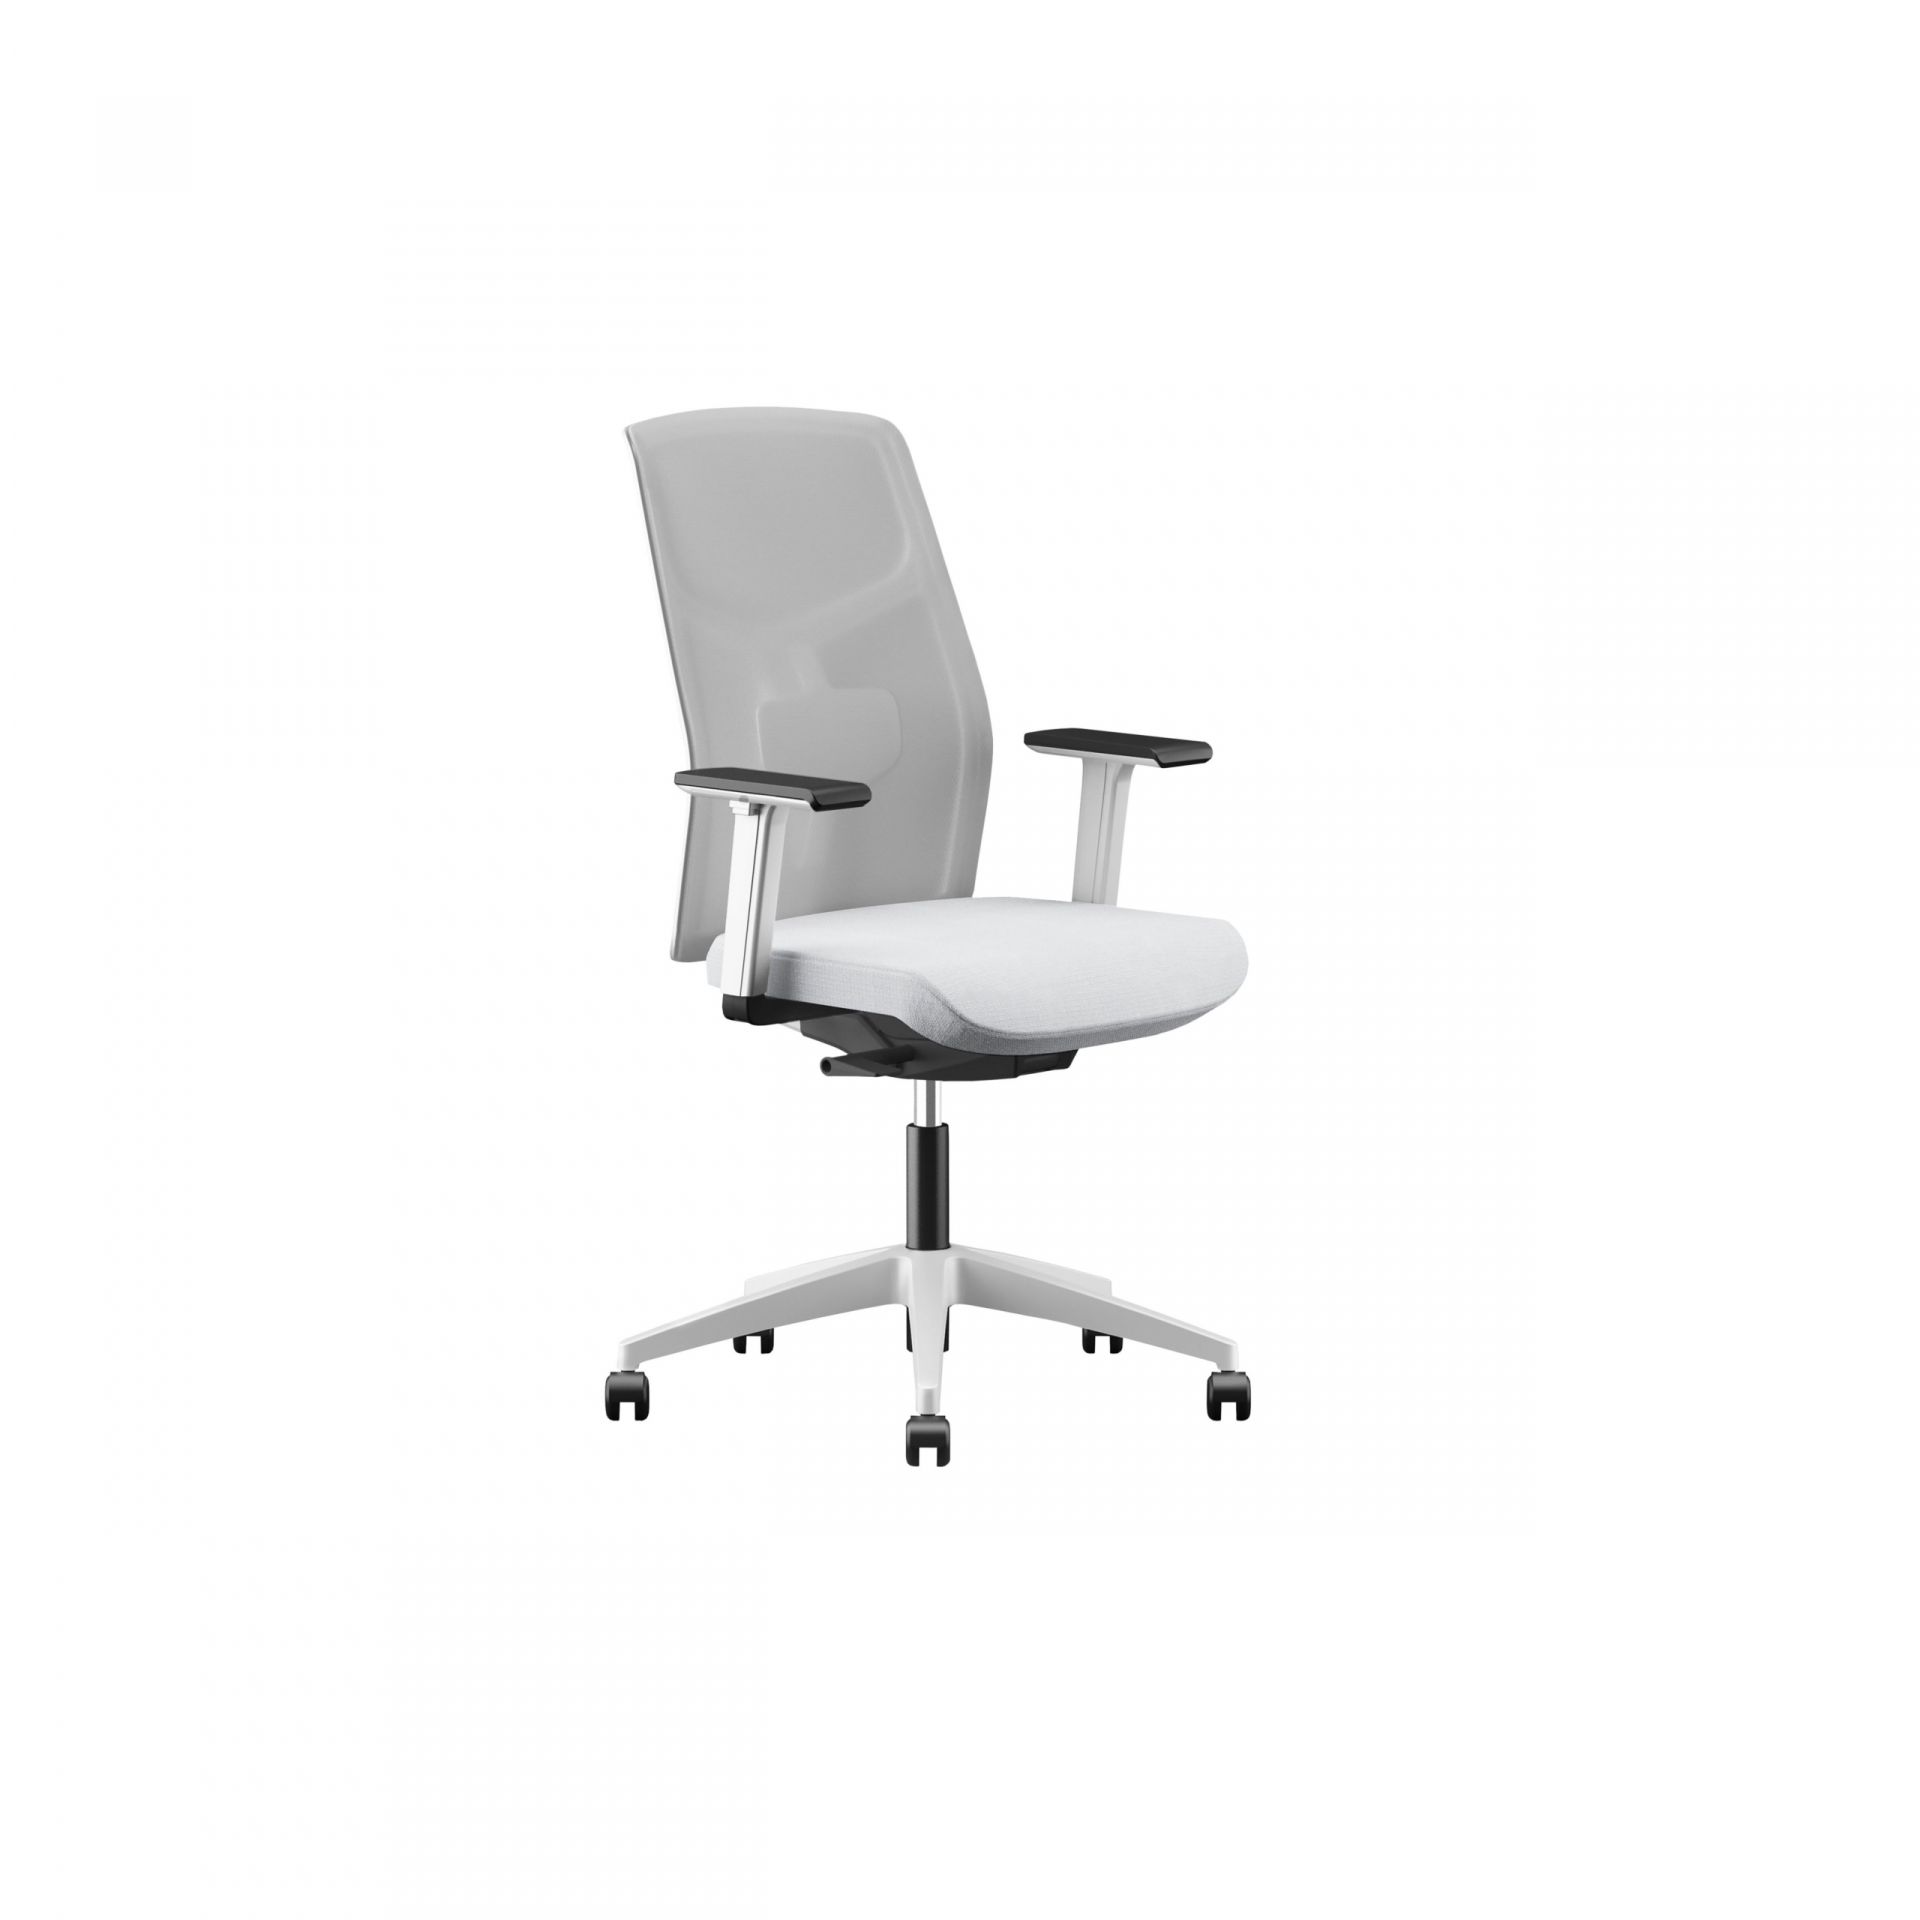 Yoyo Office chair with mesh back product image 1